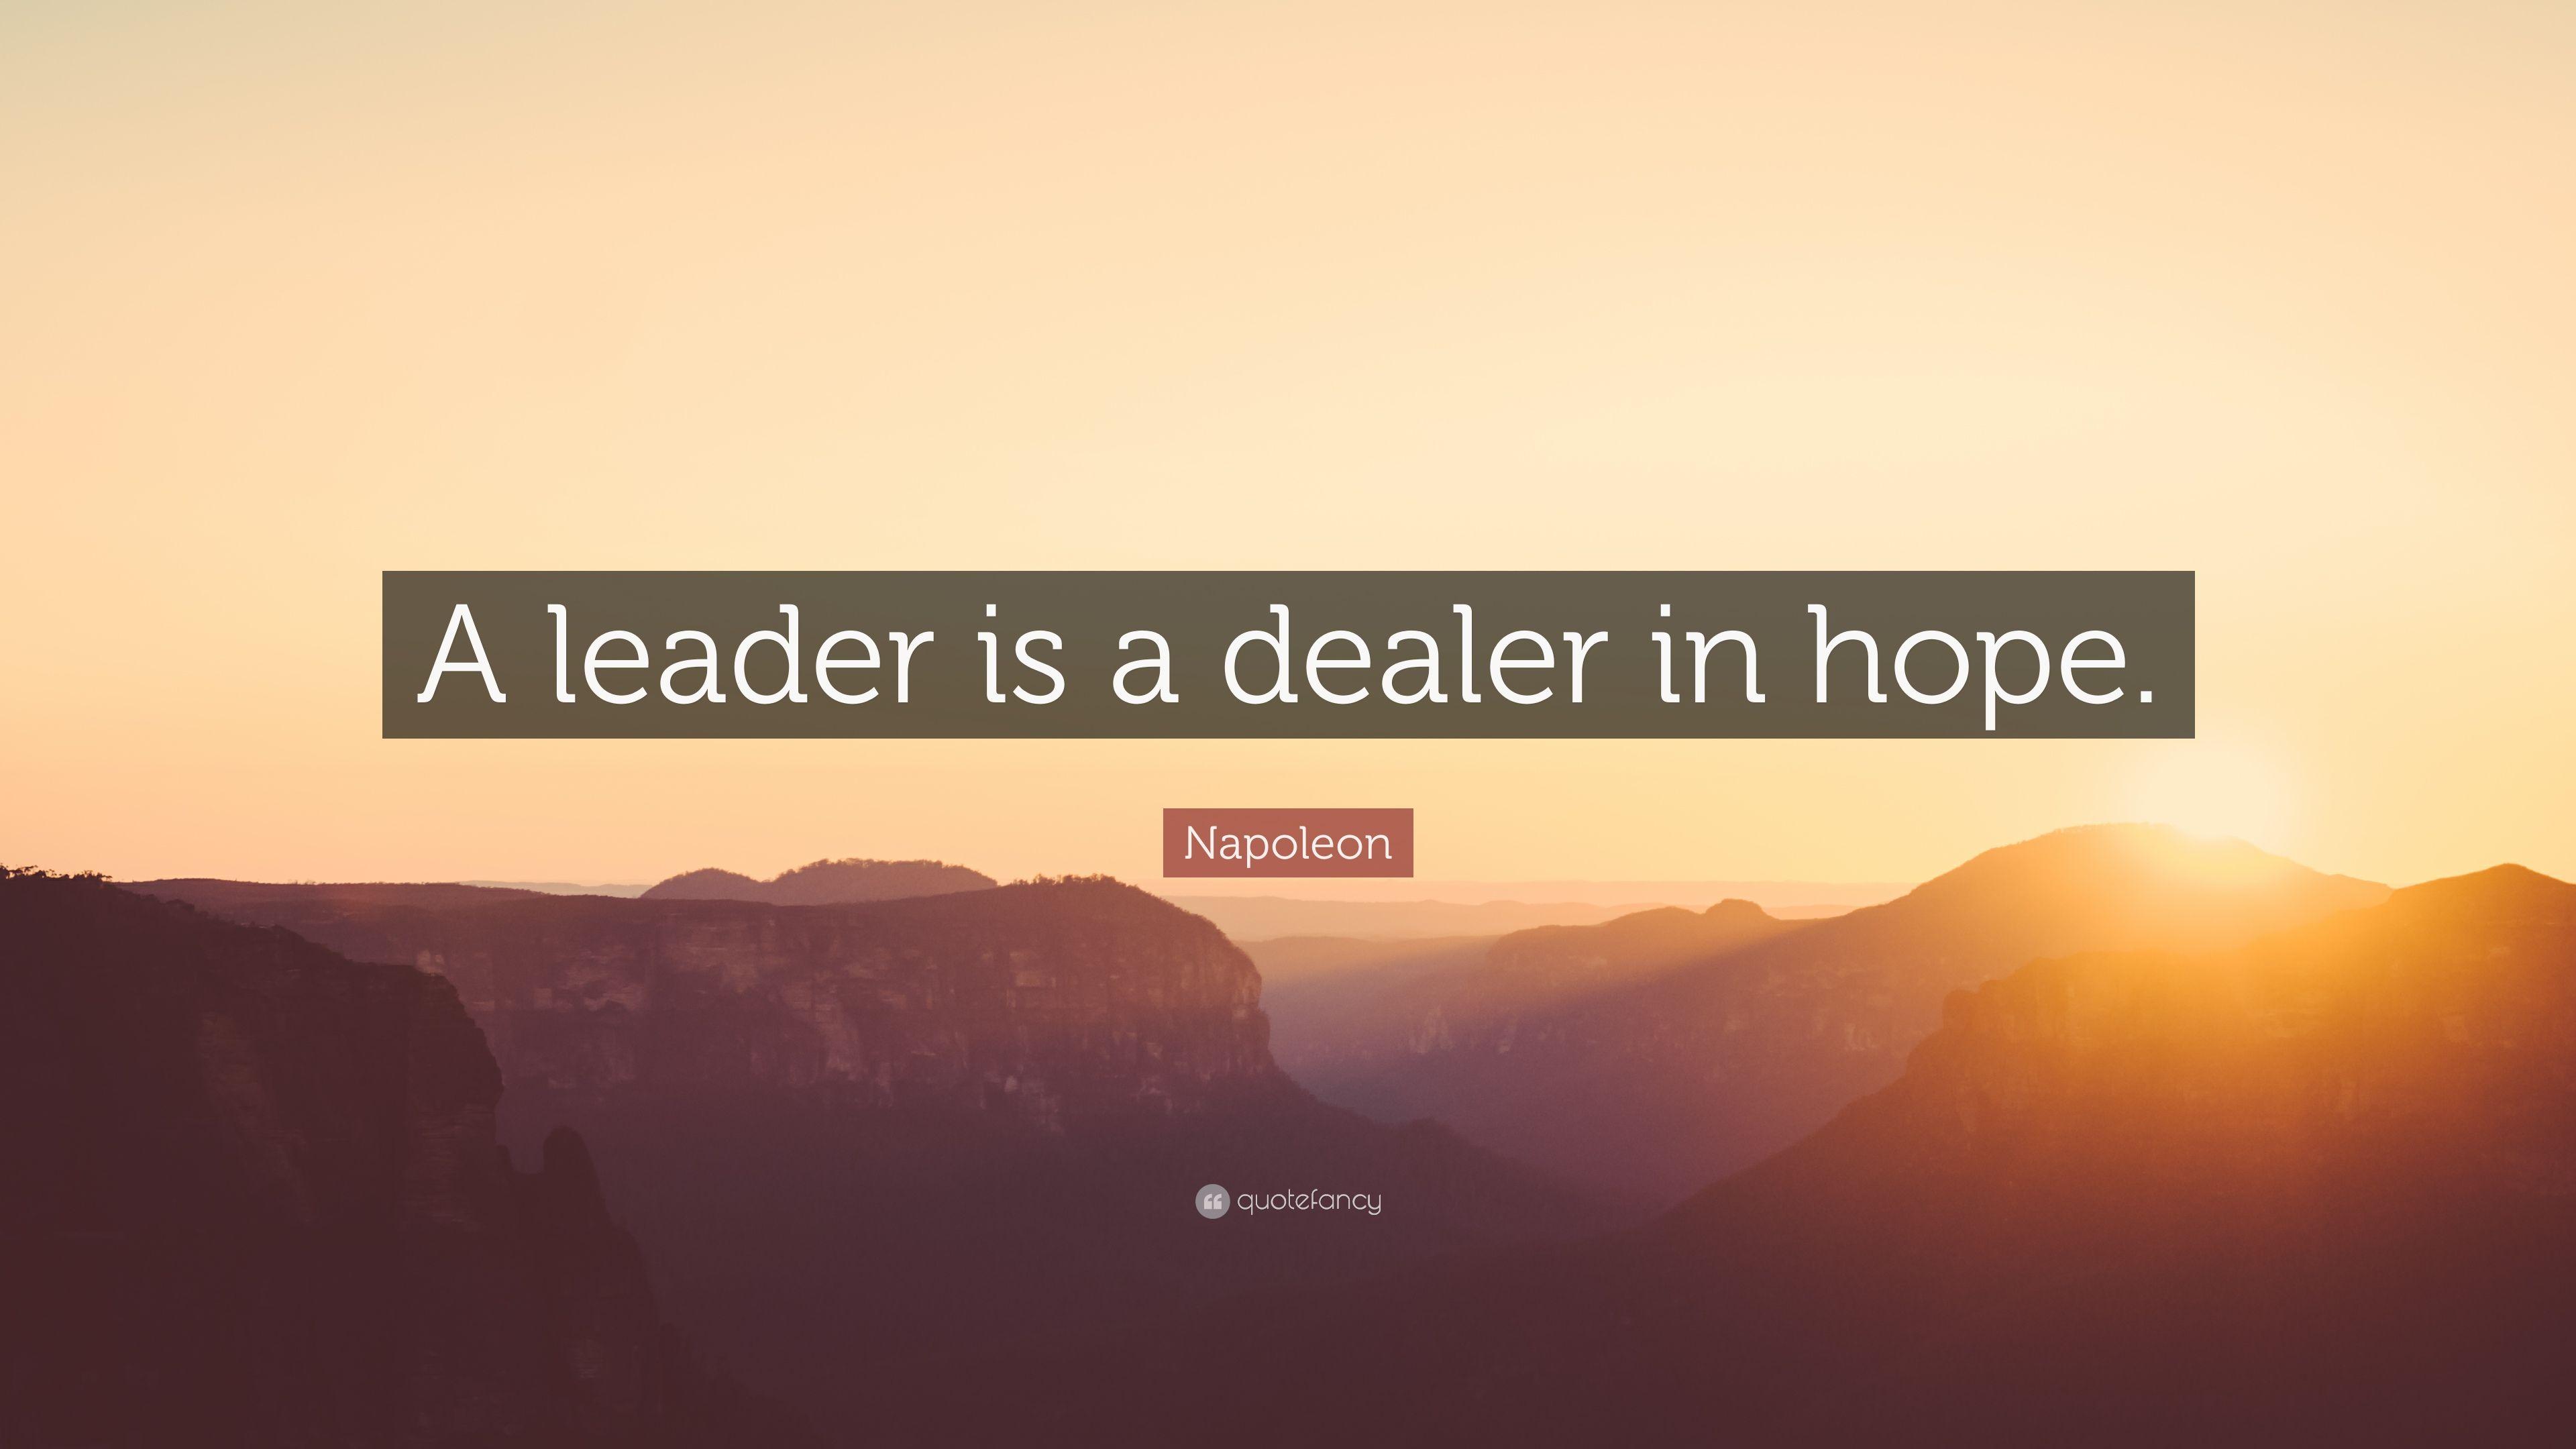 Napoleon Quote: “A leader is a dealer in hope.” 15 wallpaper